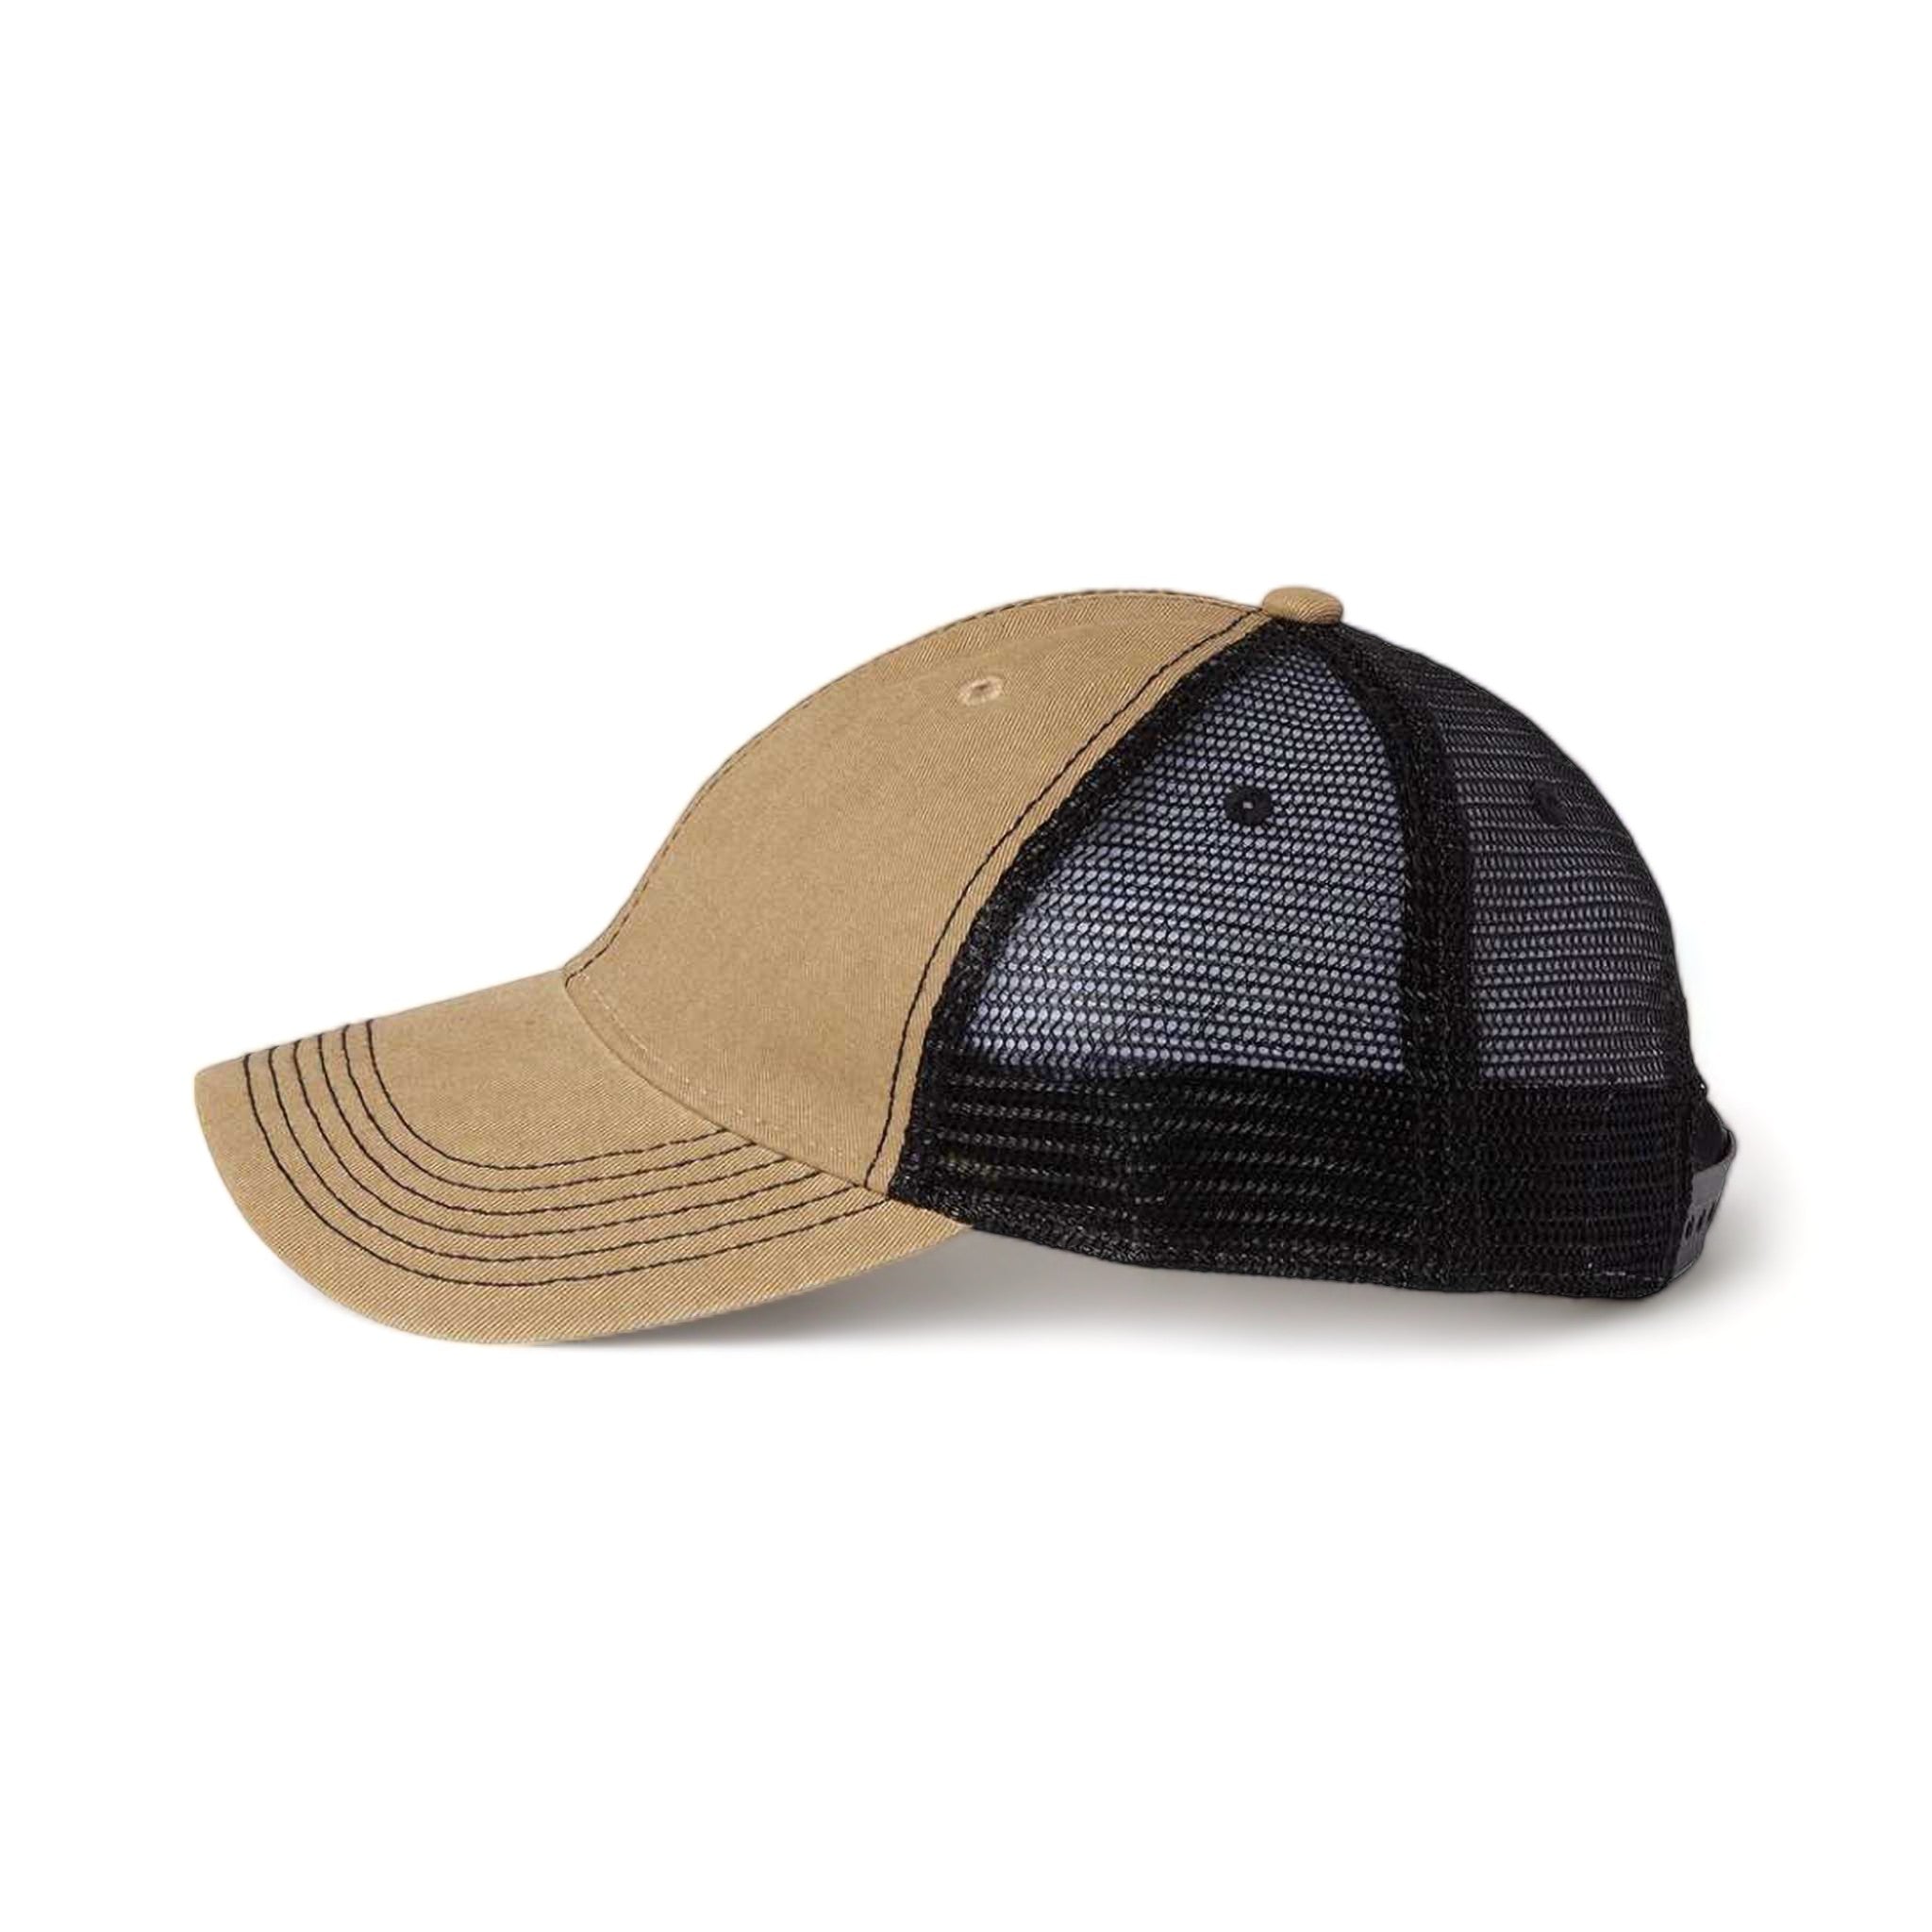 Side view of LEGACY OFA custom hat in khaki and black